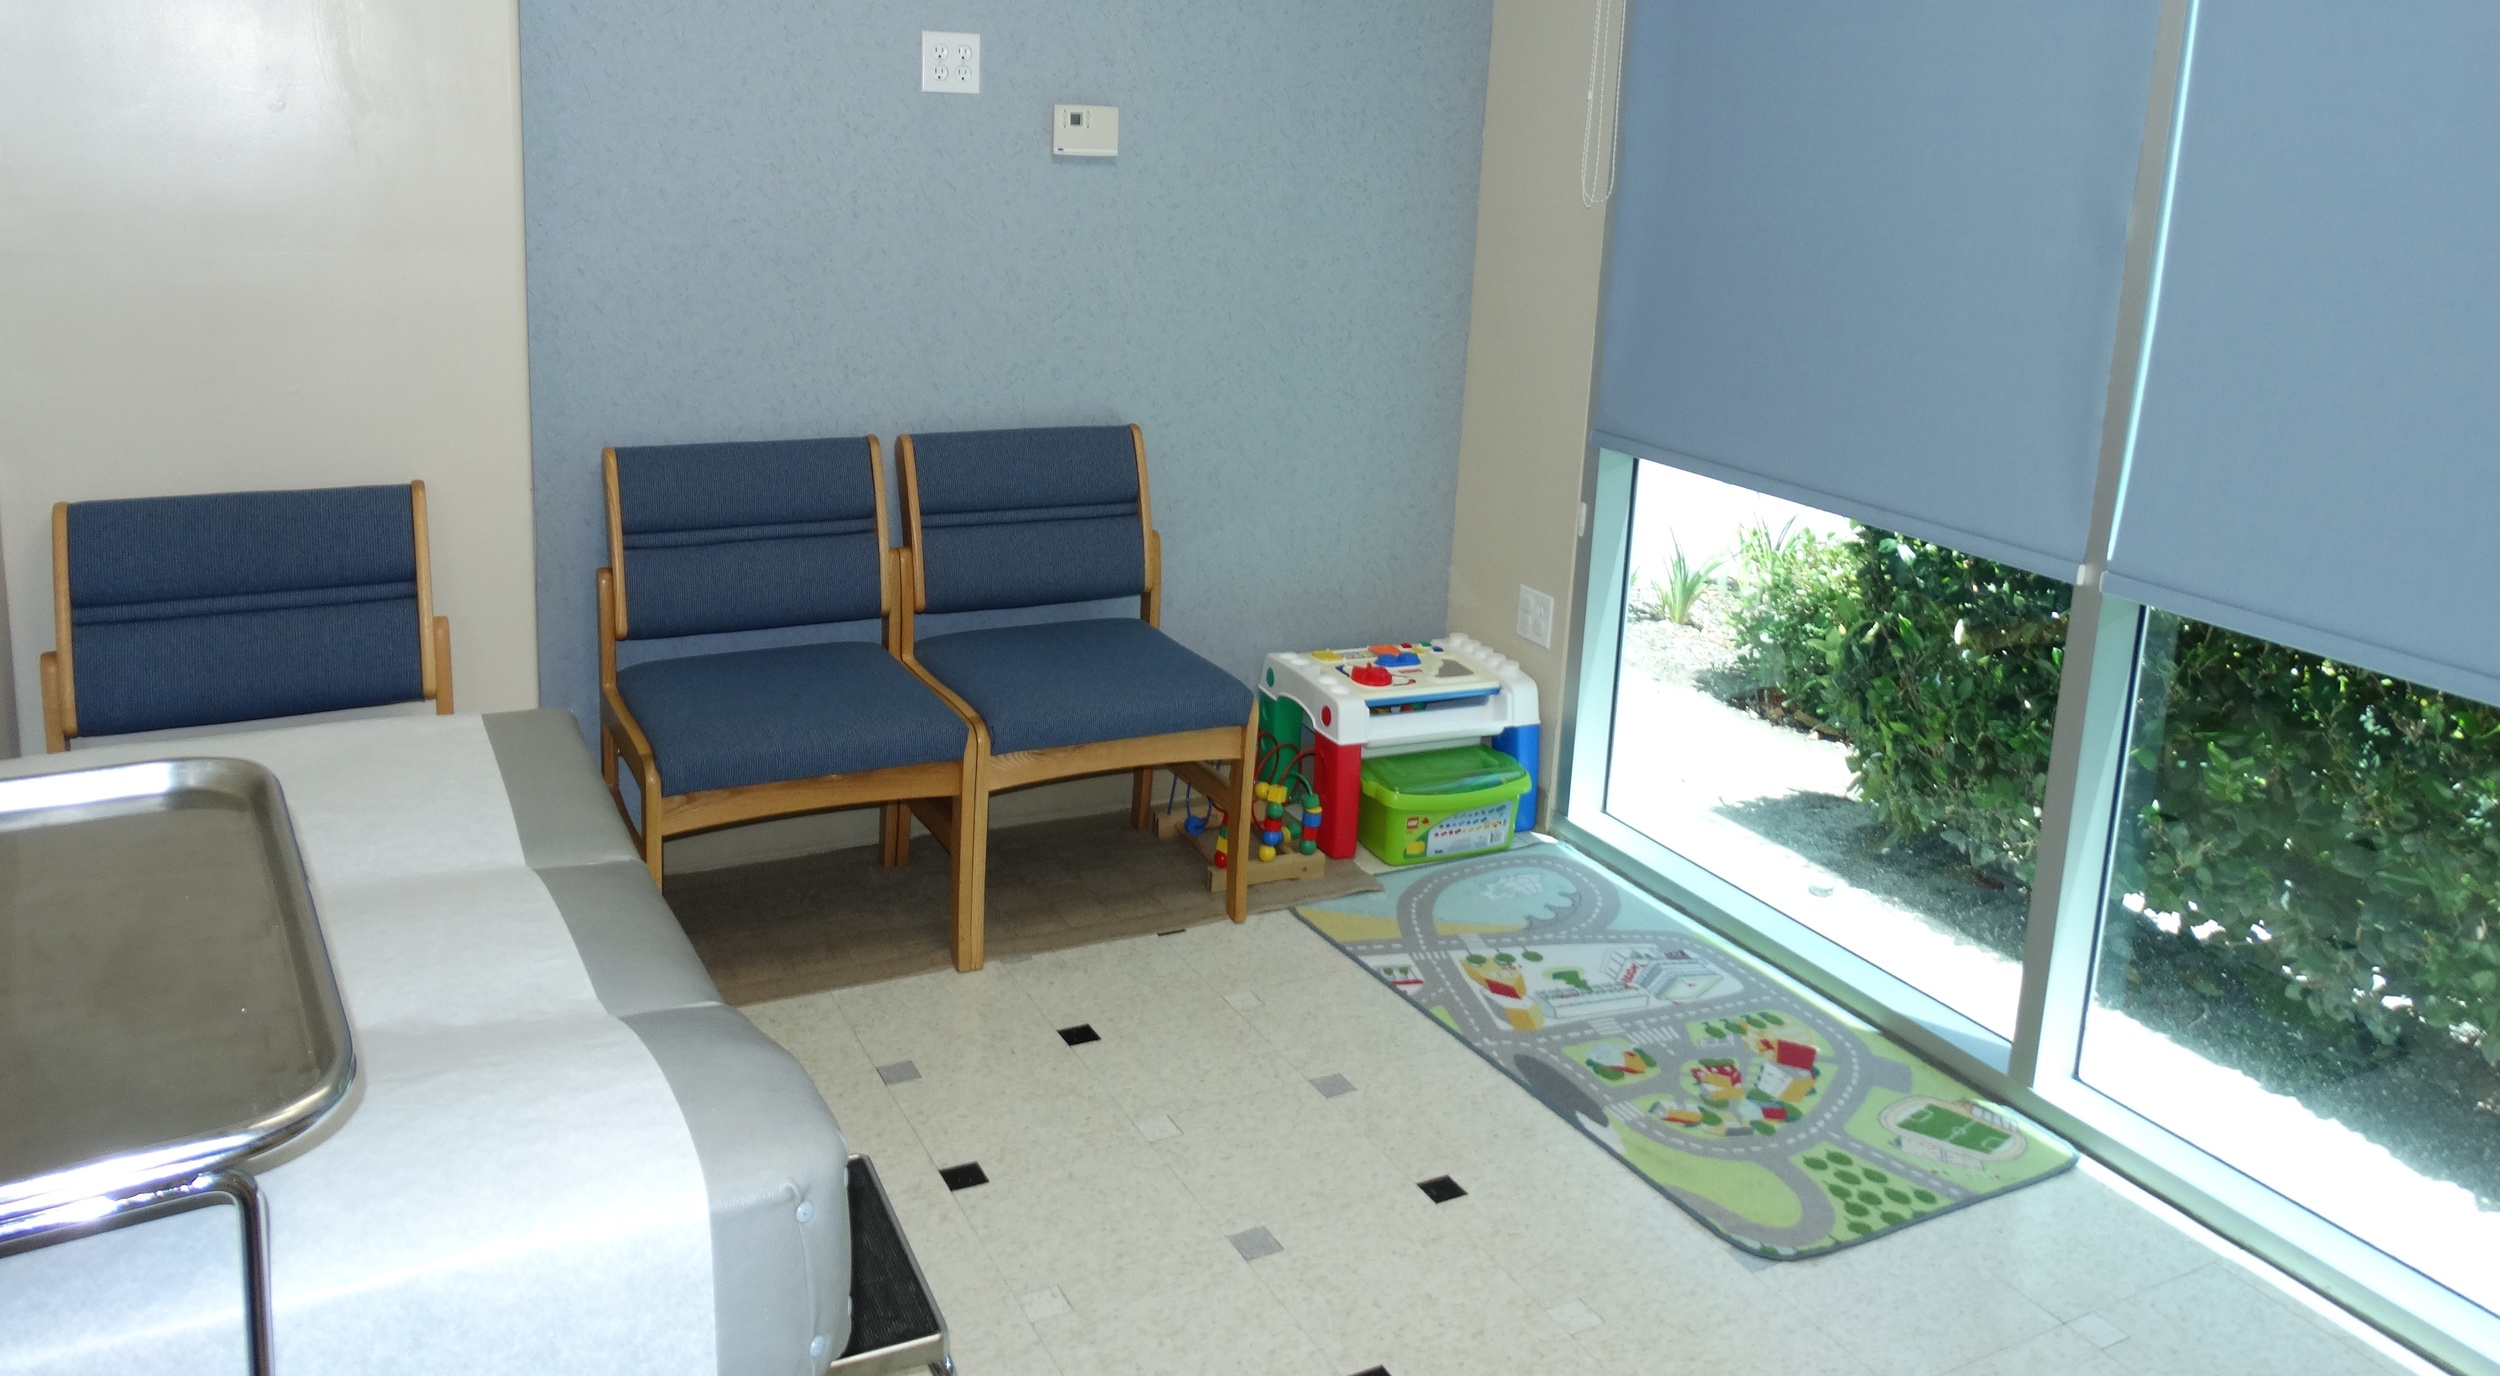  We have&nbsp;exam rooms outfitted for children. 